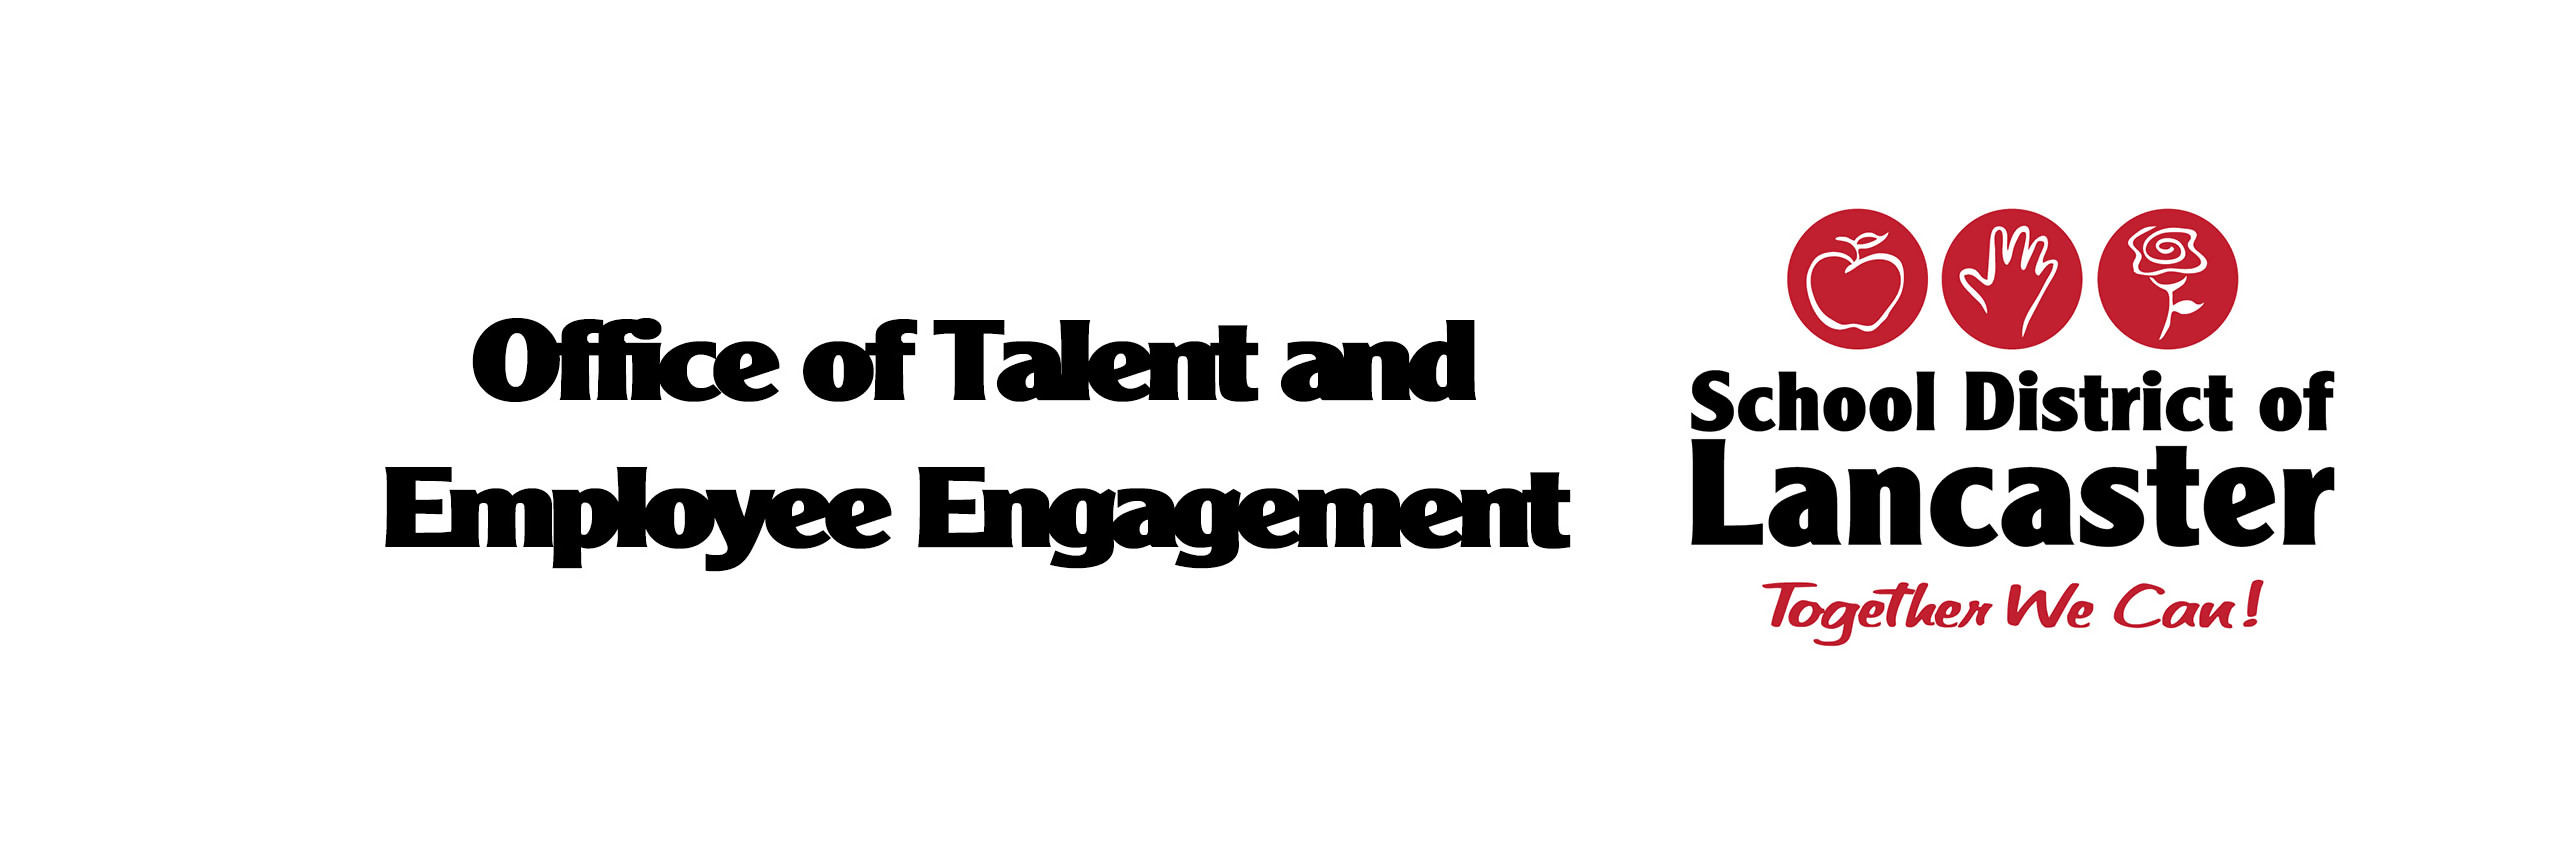 Office of Talent and Employee Engagement